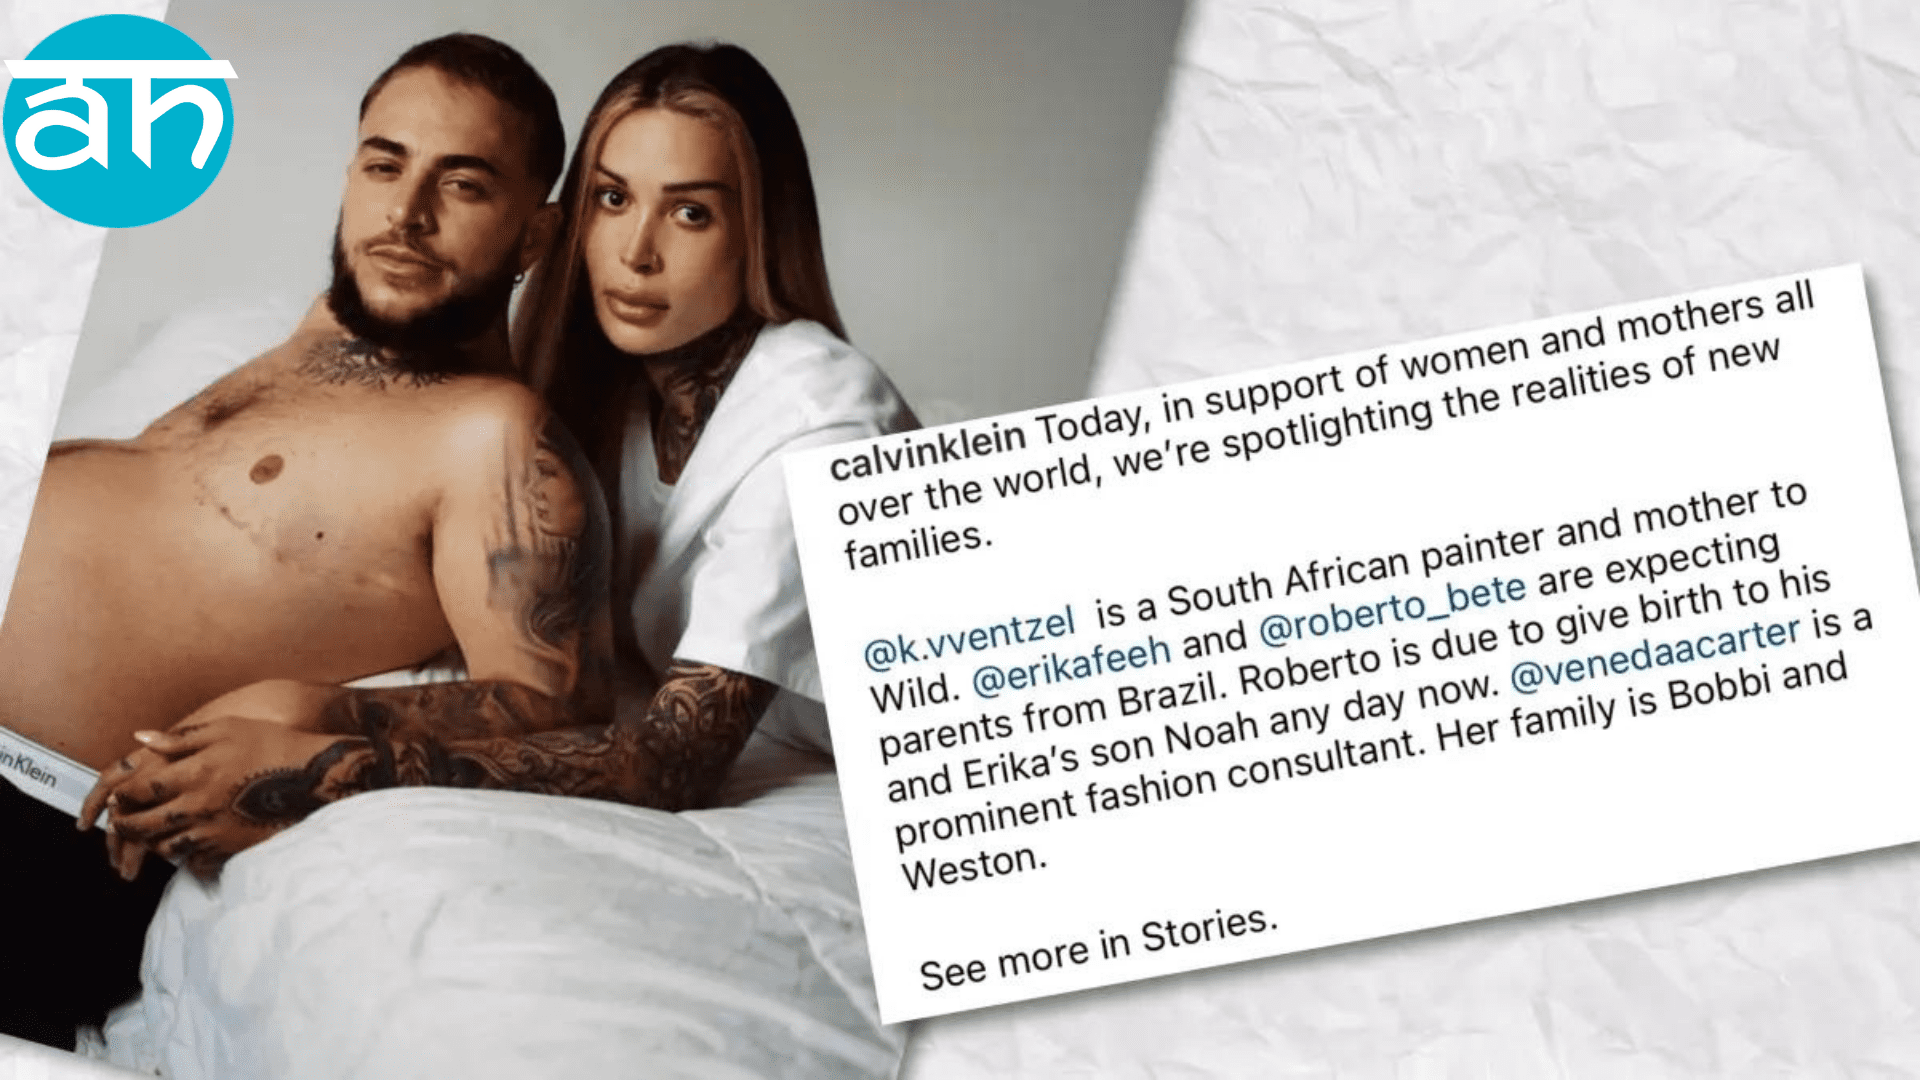 'Pregnant man' in Calvin Klein ad sparks international controversy